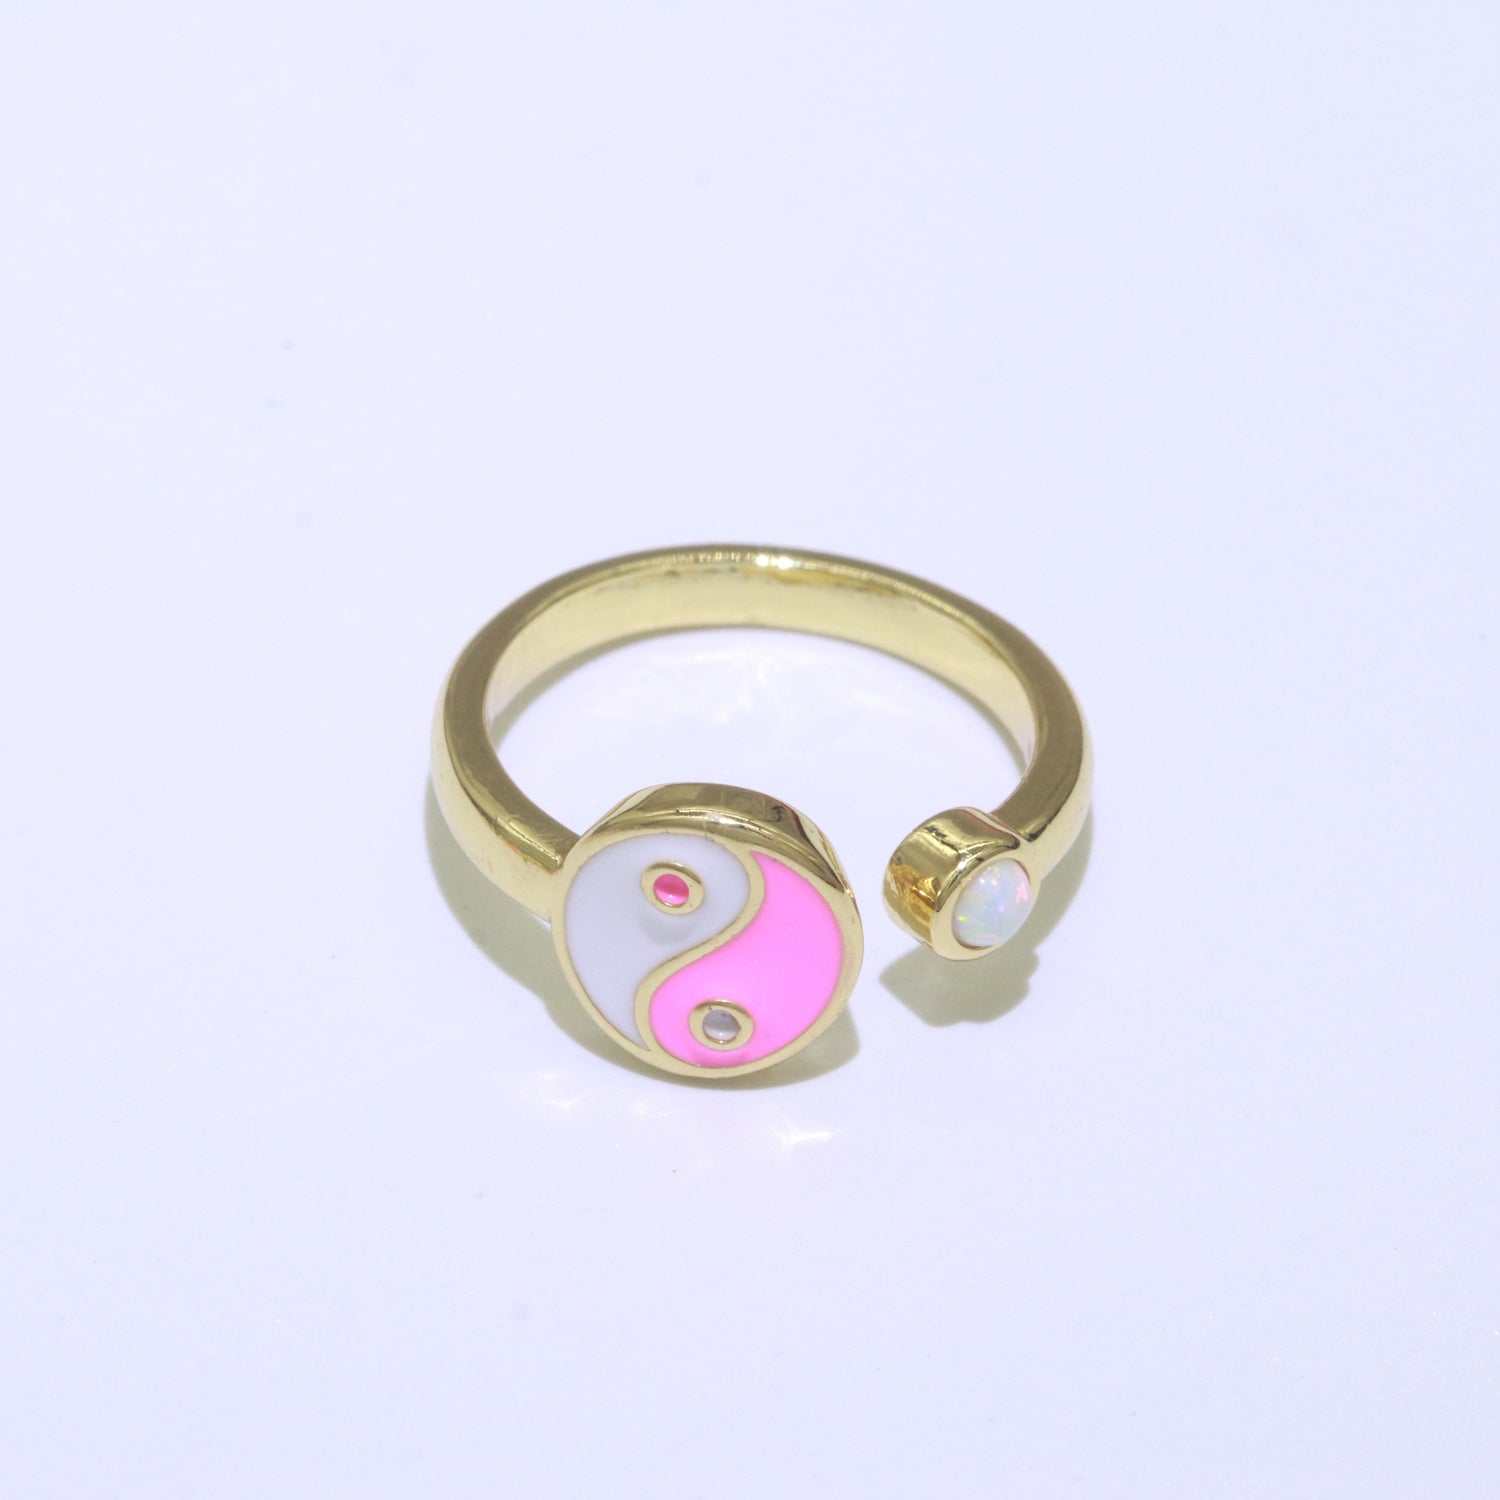 Adjustable Colorful Yin Yang Ring Dainty Gold Enamel Y2K Ring Neon Color Black White Blue Pink Purple Ring Open Adjustable - DLUXCA